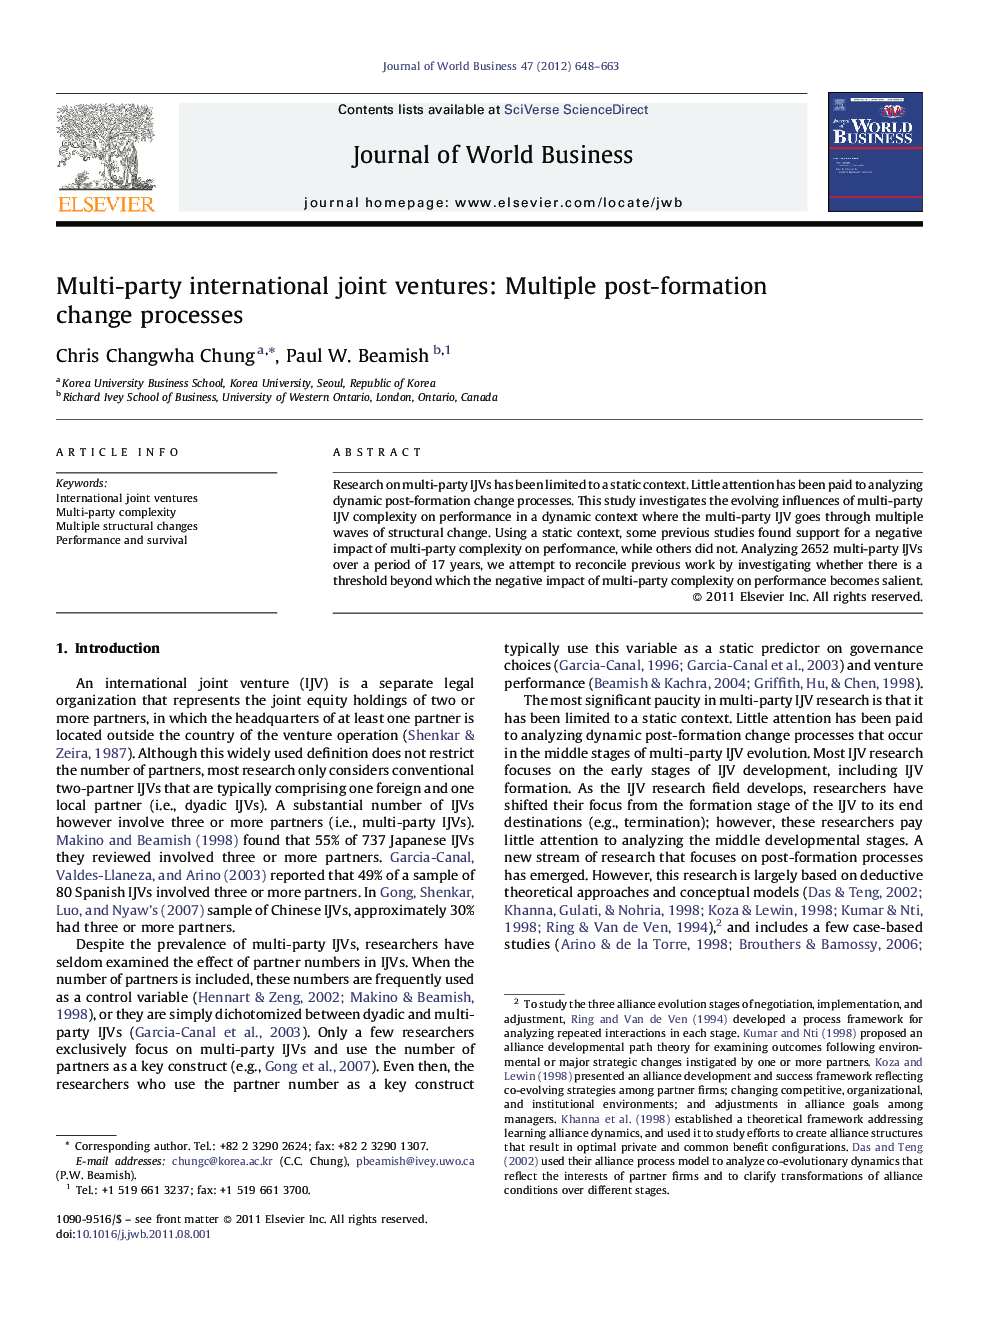 Multi-party international joint ventures: Multiple post-formation change processes